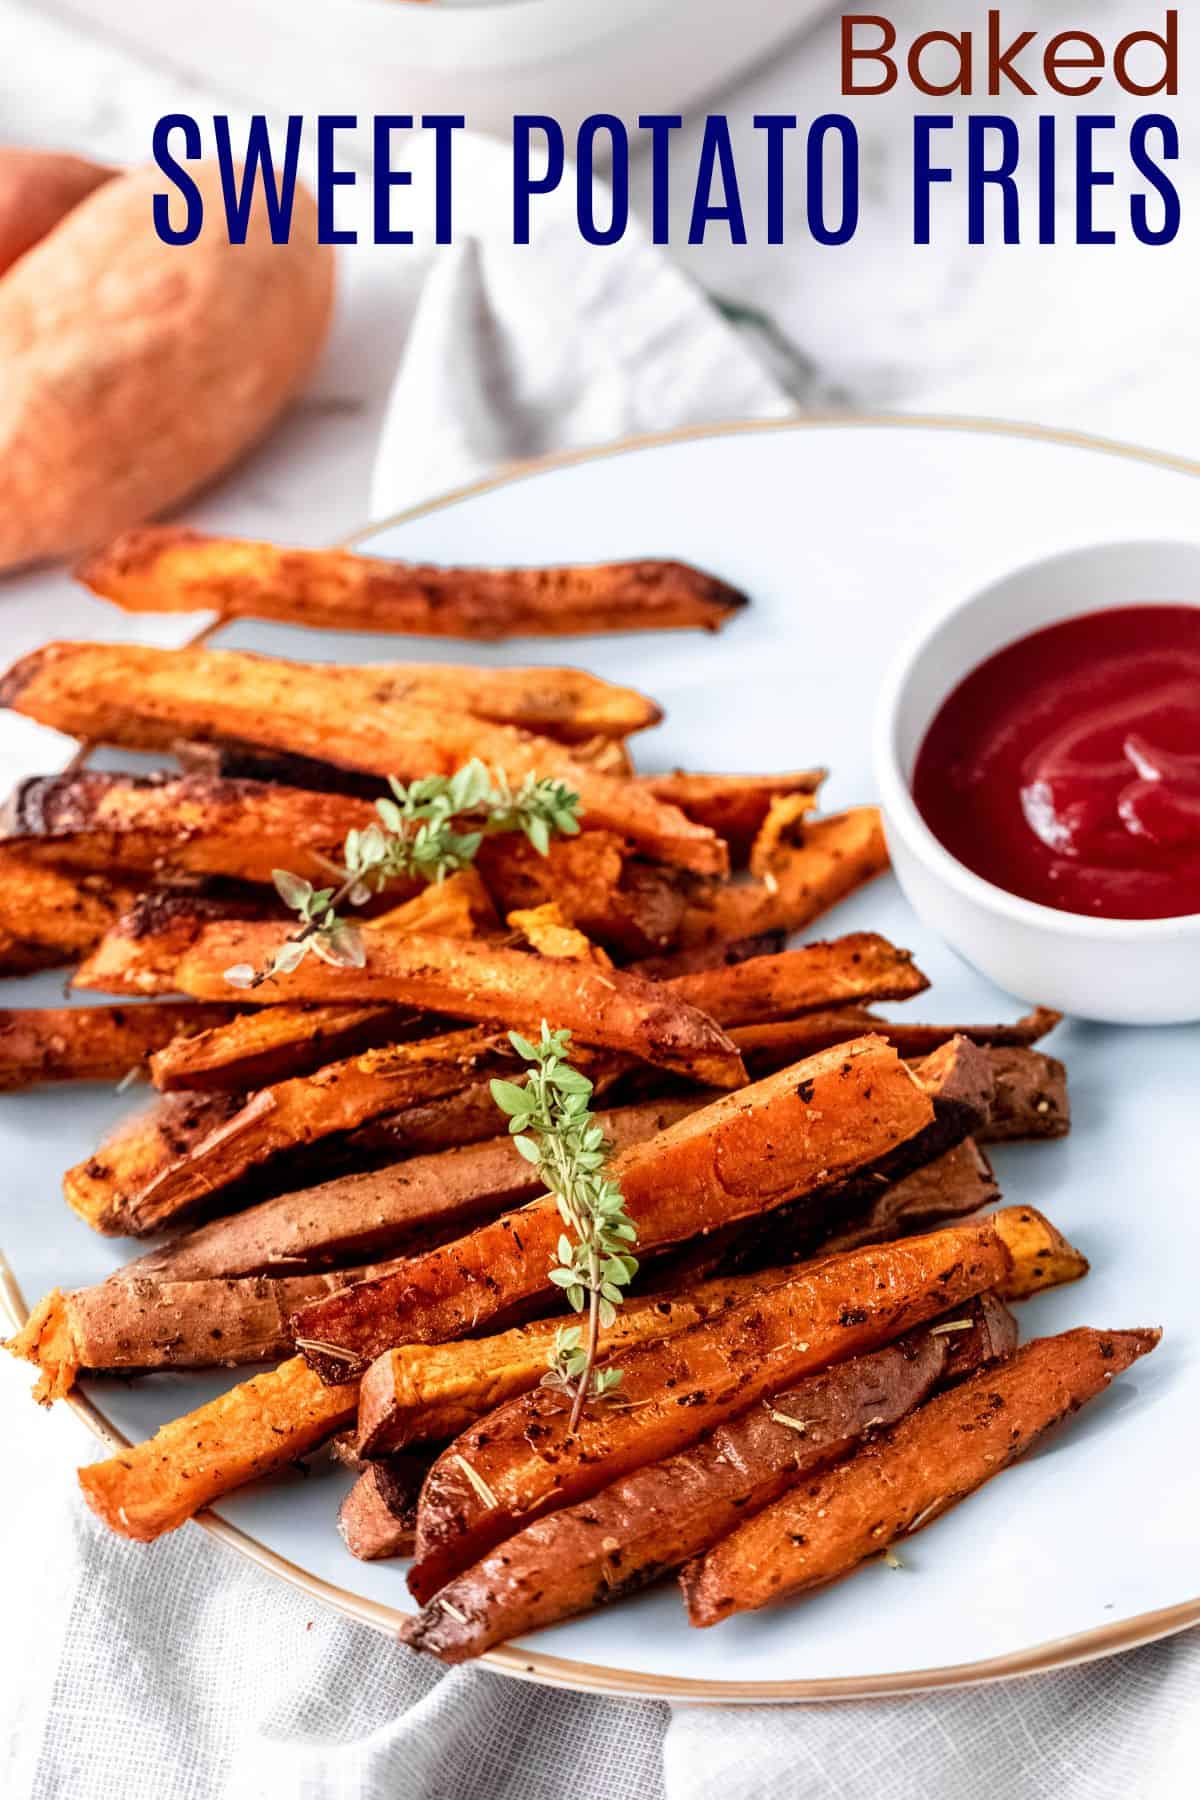 Easy Baked Sweet Potato Fries | Cupcakes & Kale Chips